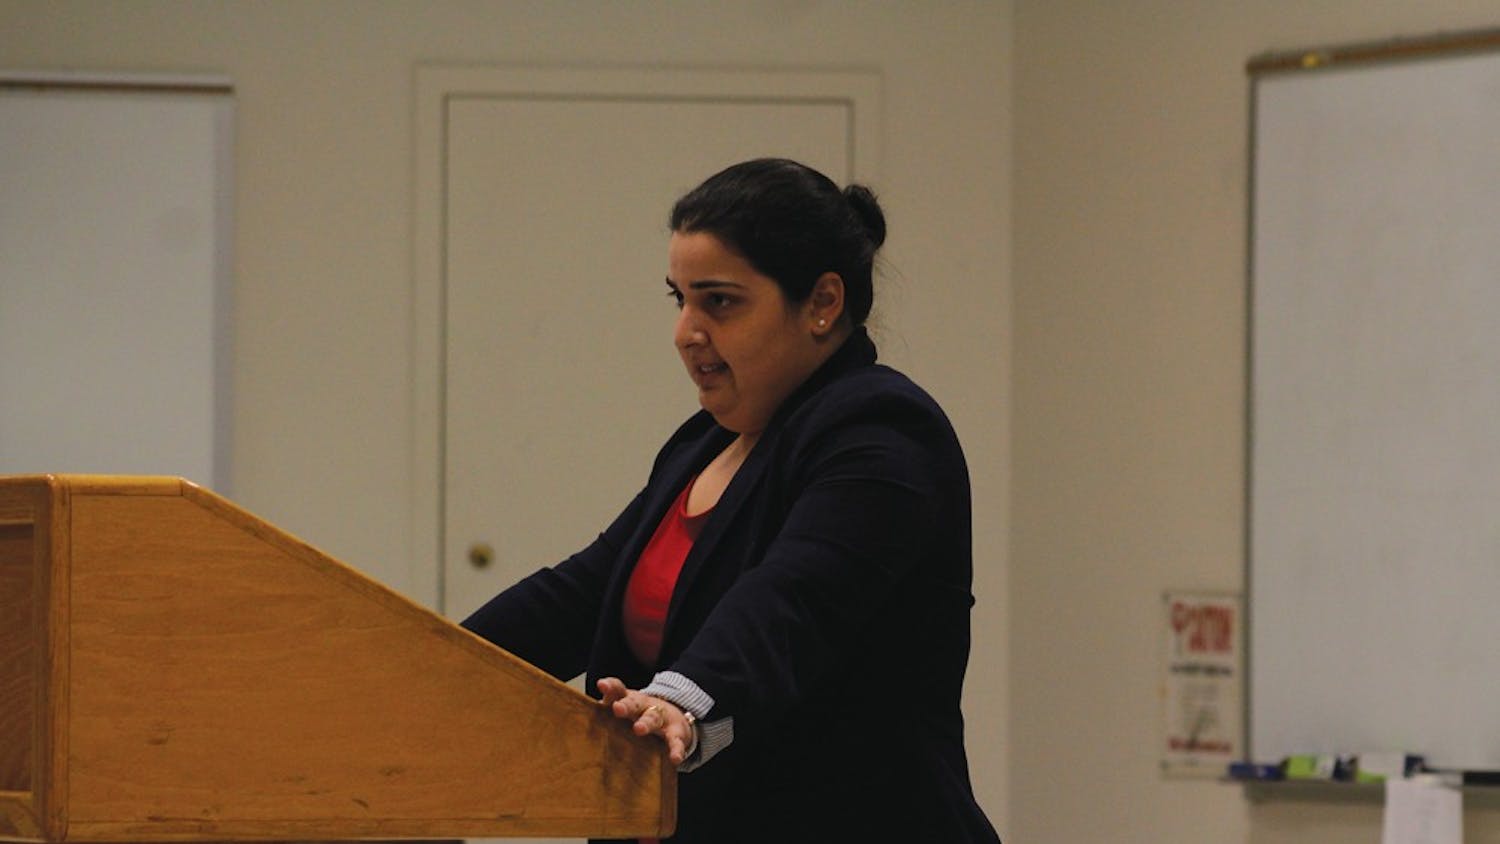 Ana Sofia Nuñez, an immigration attorney from Raleigh, discusses House Bill 63 and immigrants' rights on Wednesday during a panel on the topic of undocumented immigrants.